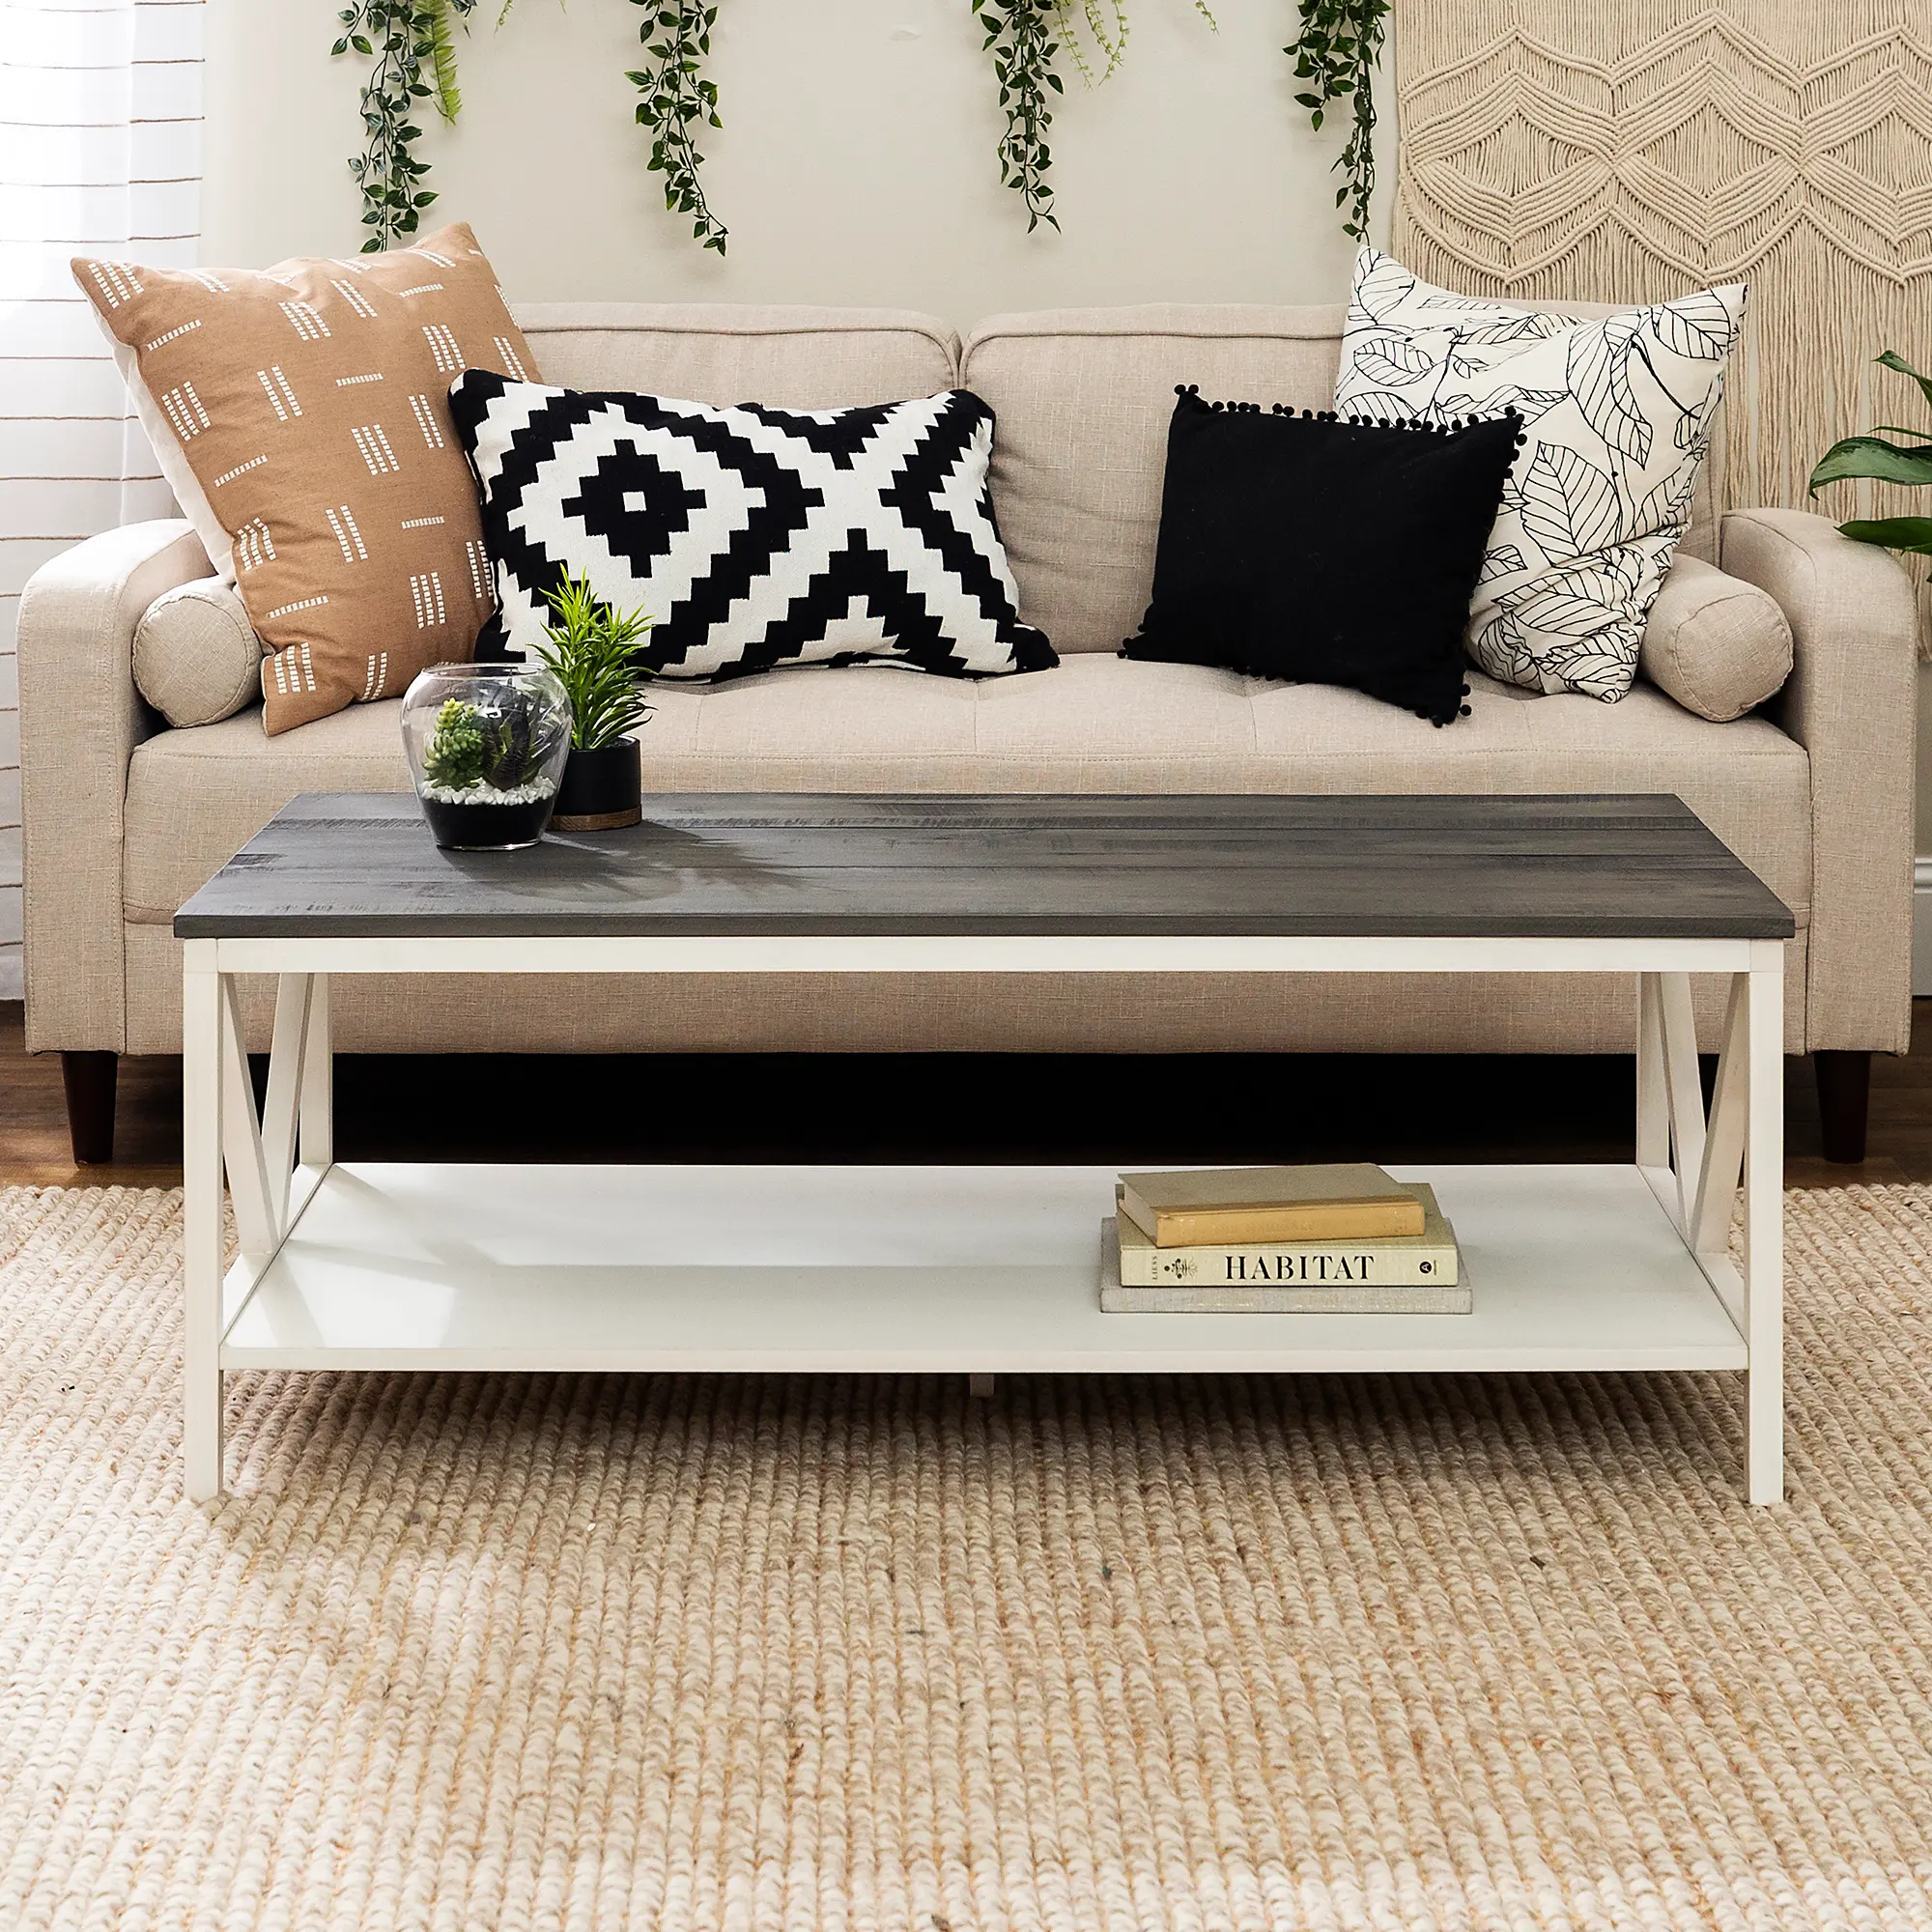 Natalee White Wash and Gray Distressed Farmhouse Coffee Table -...